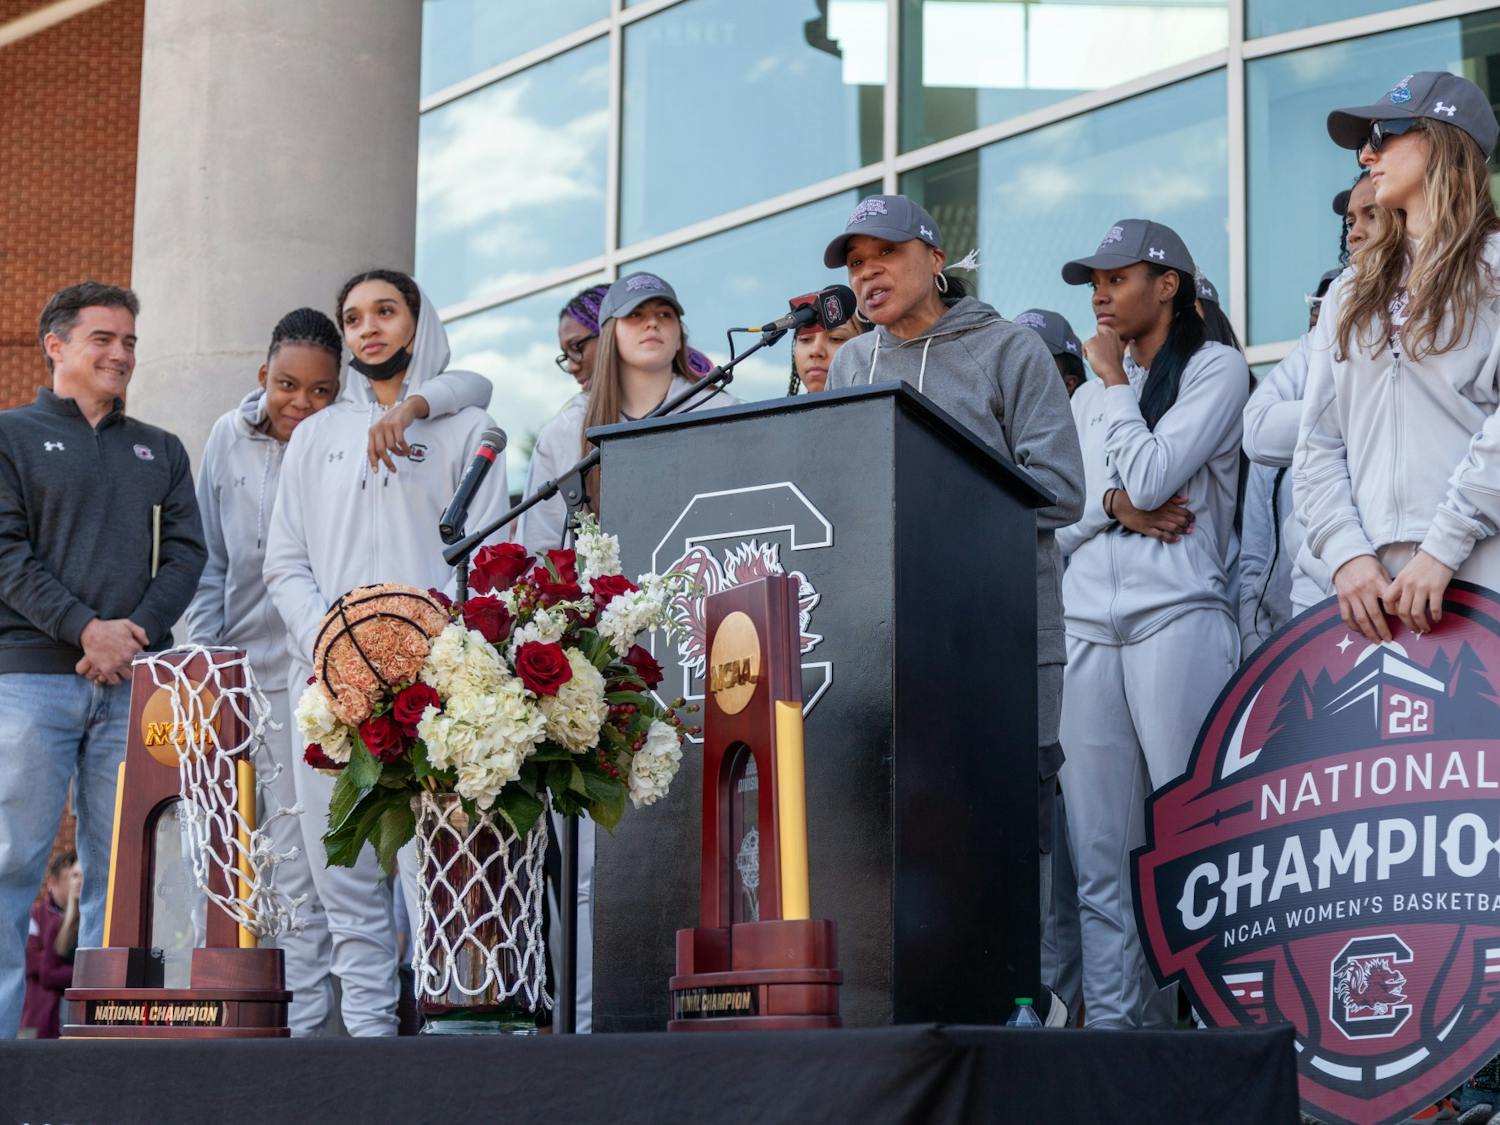 South Carolina women's basketball head coach Dawn Staley speaks to fans outside of Colonial Life Arena in Columbia, SC on April 4, 2022. Fans cheered as members of the team spoke.